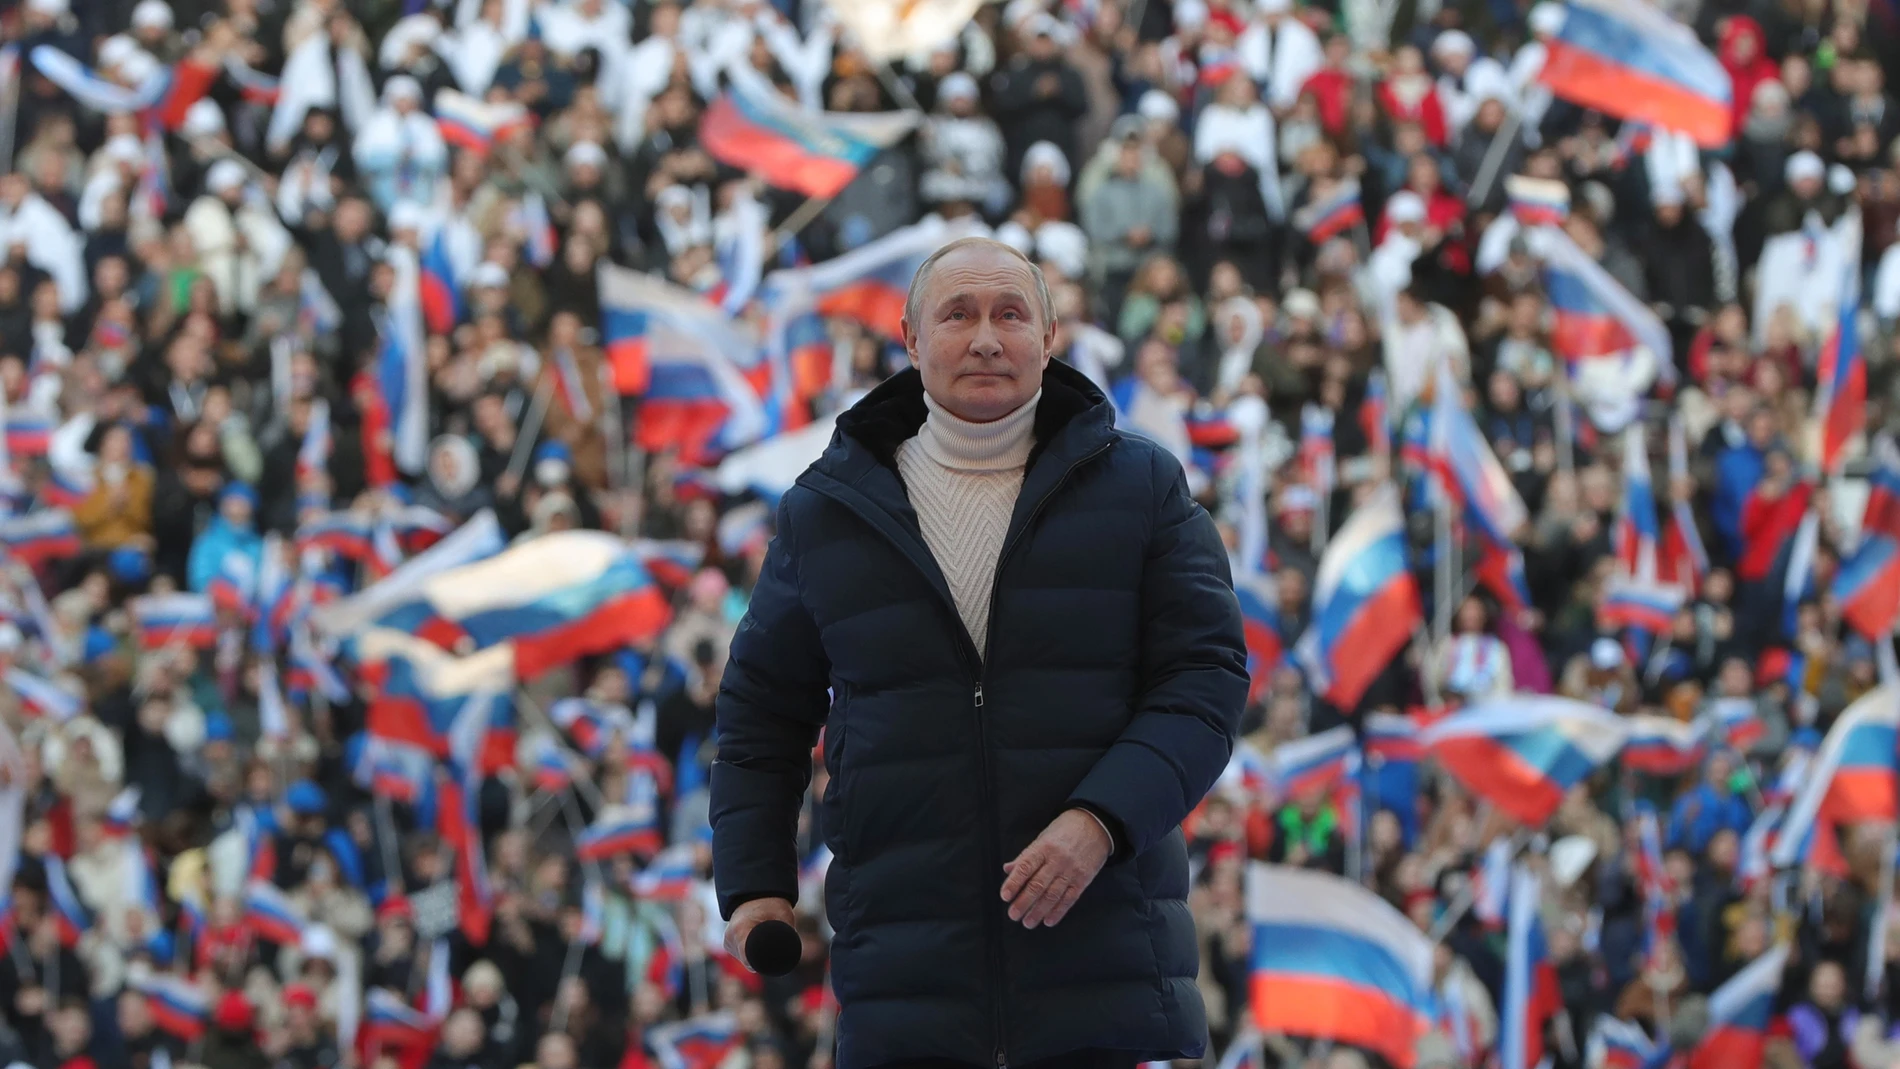 Concert marking the 8th anniversary of Crimea's reunification with Russia